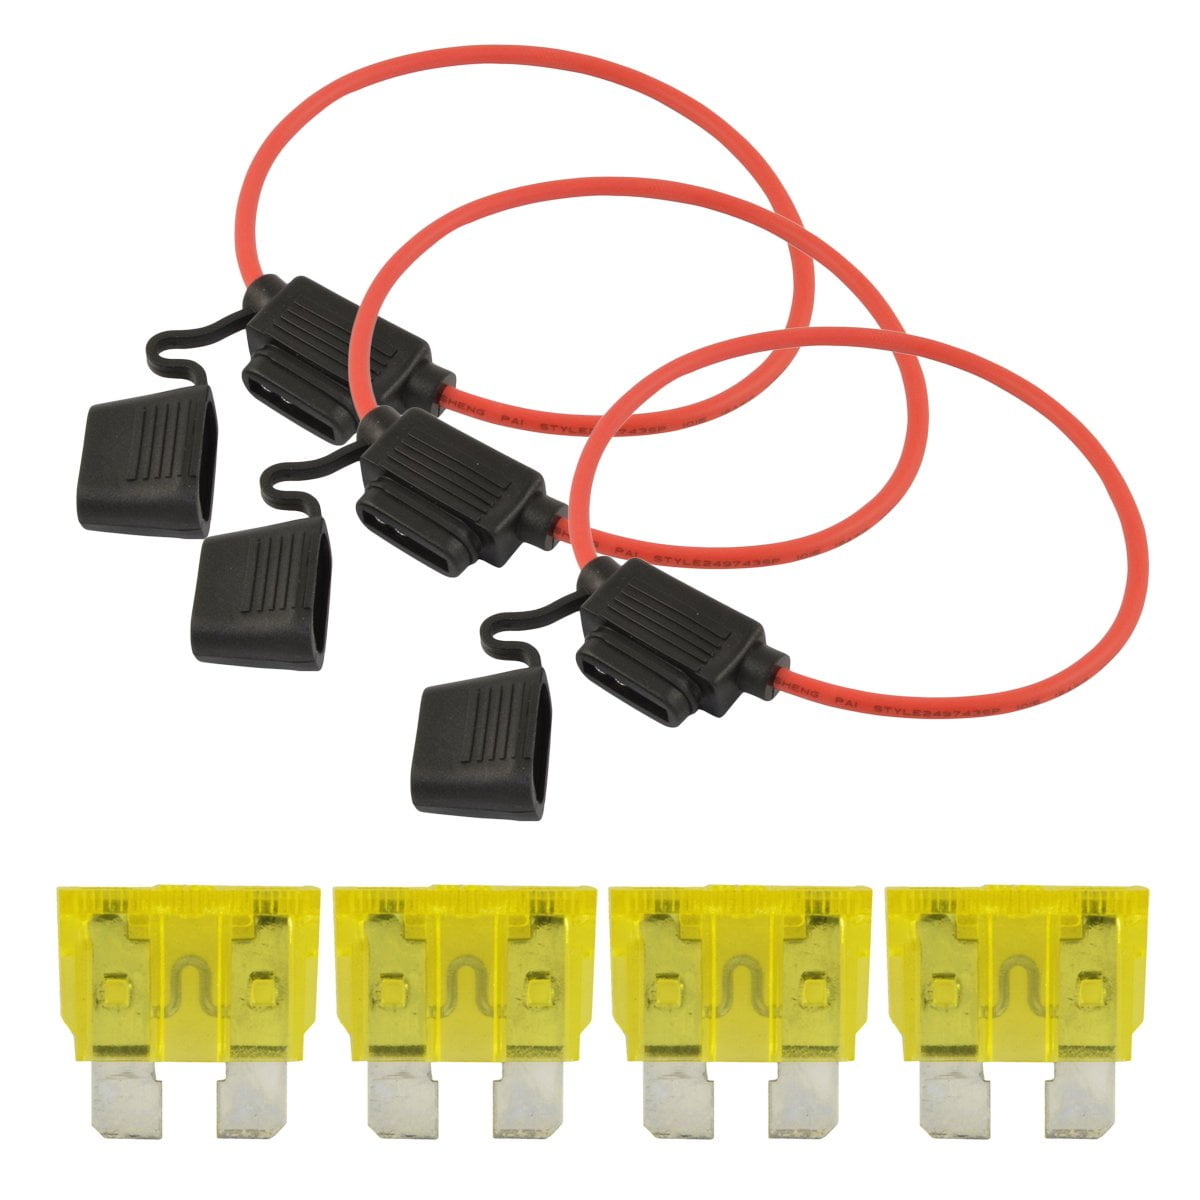 5 Pack 12AWG ATC 30AMP Automotive Water-Resistant In Line Mini Fuse Holder Blade 